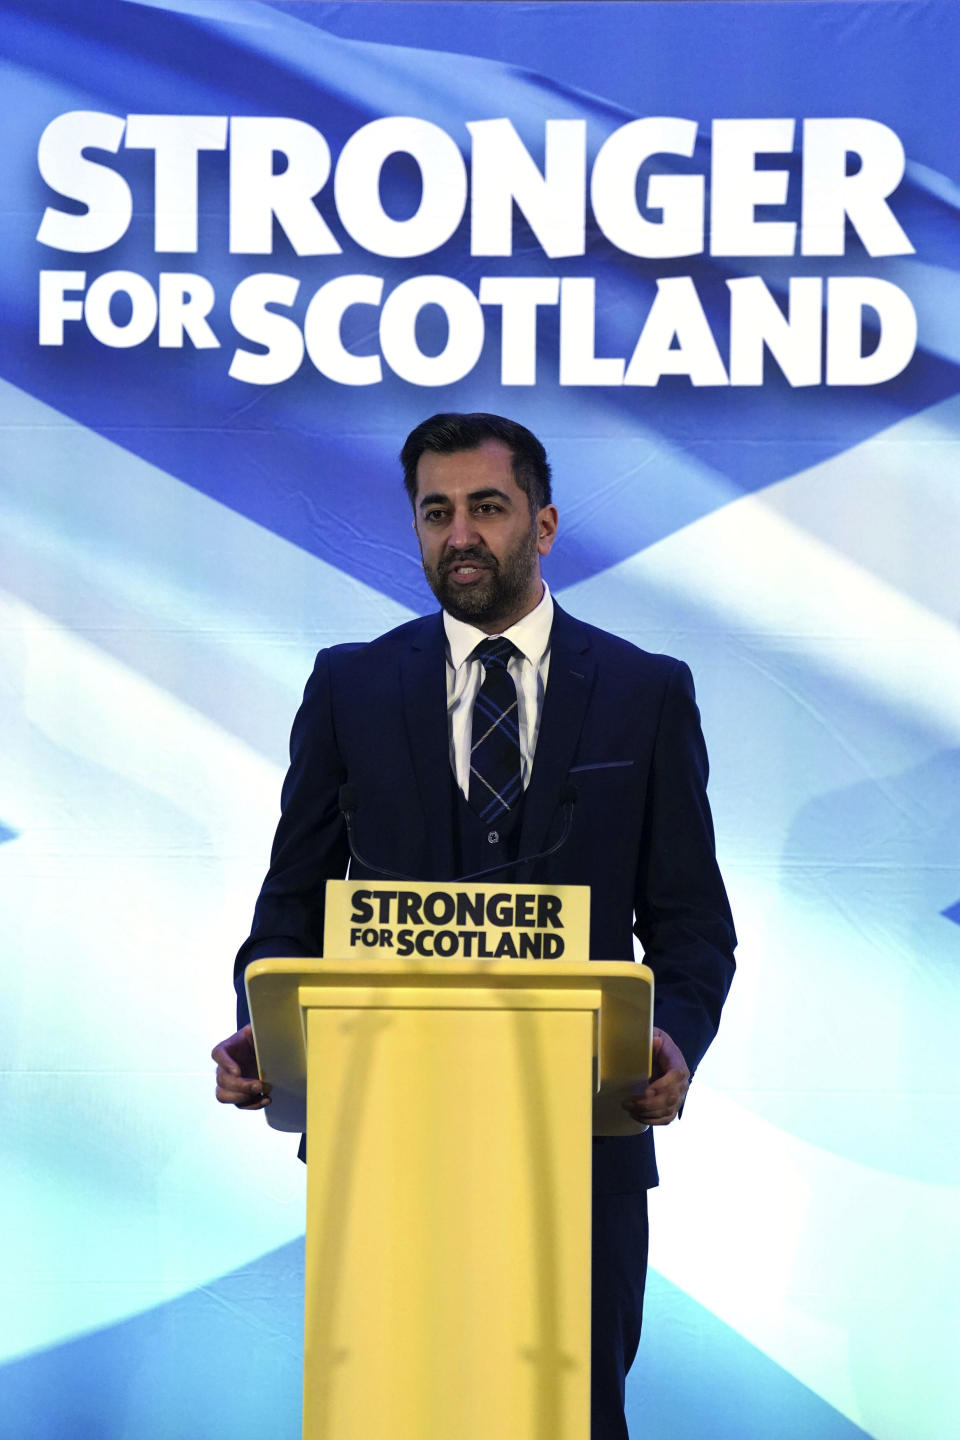 Newly elected Scottish National Party leader Humza Yousaf speaks after being announced new SNP leader, at Murrayfield Stadium, in Edinburgh, Scotland, Monday, March 27, 2023. Scotland’s governing Scottish National Party elected Yousaf as its new leader on Monday after a bruising five-week contest that exposed deep fractures within the pro-independence movement. The 37-year-old son of South Asian immigrants is set to become the first person of color to serve as Scotland’s first minister. (Andrew Milligan/PA via AP)